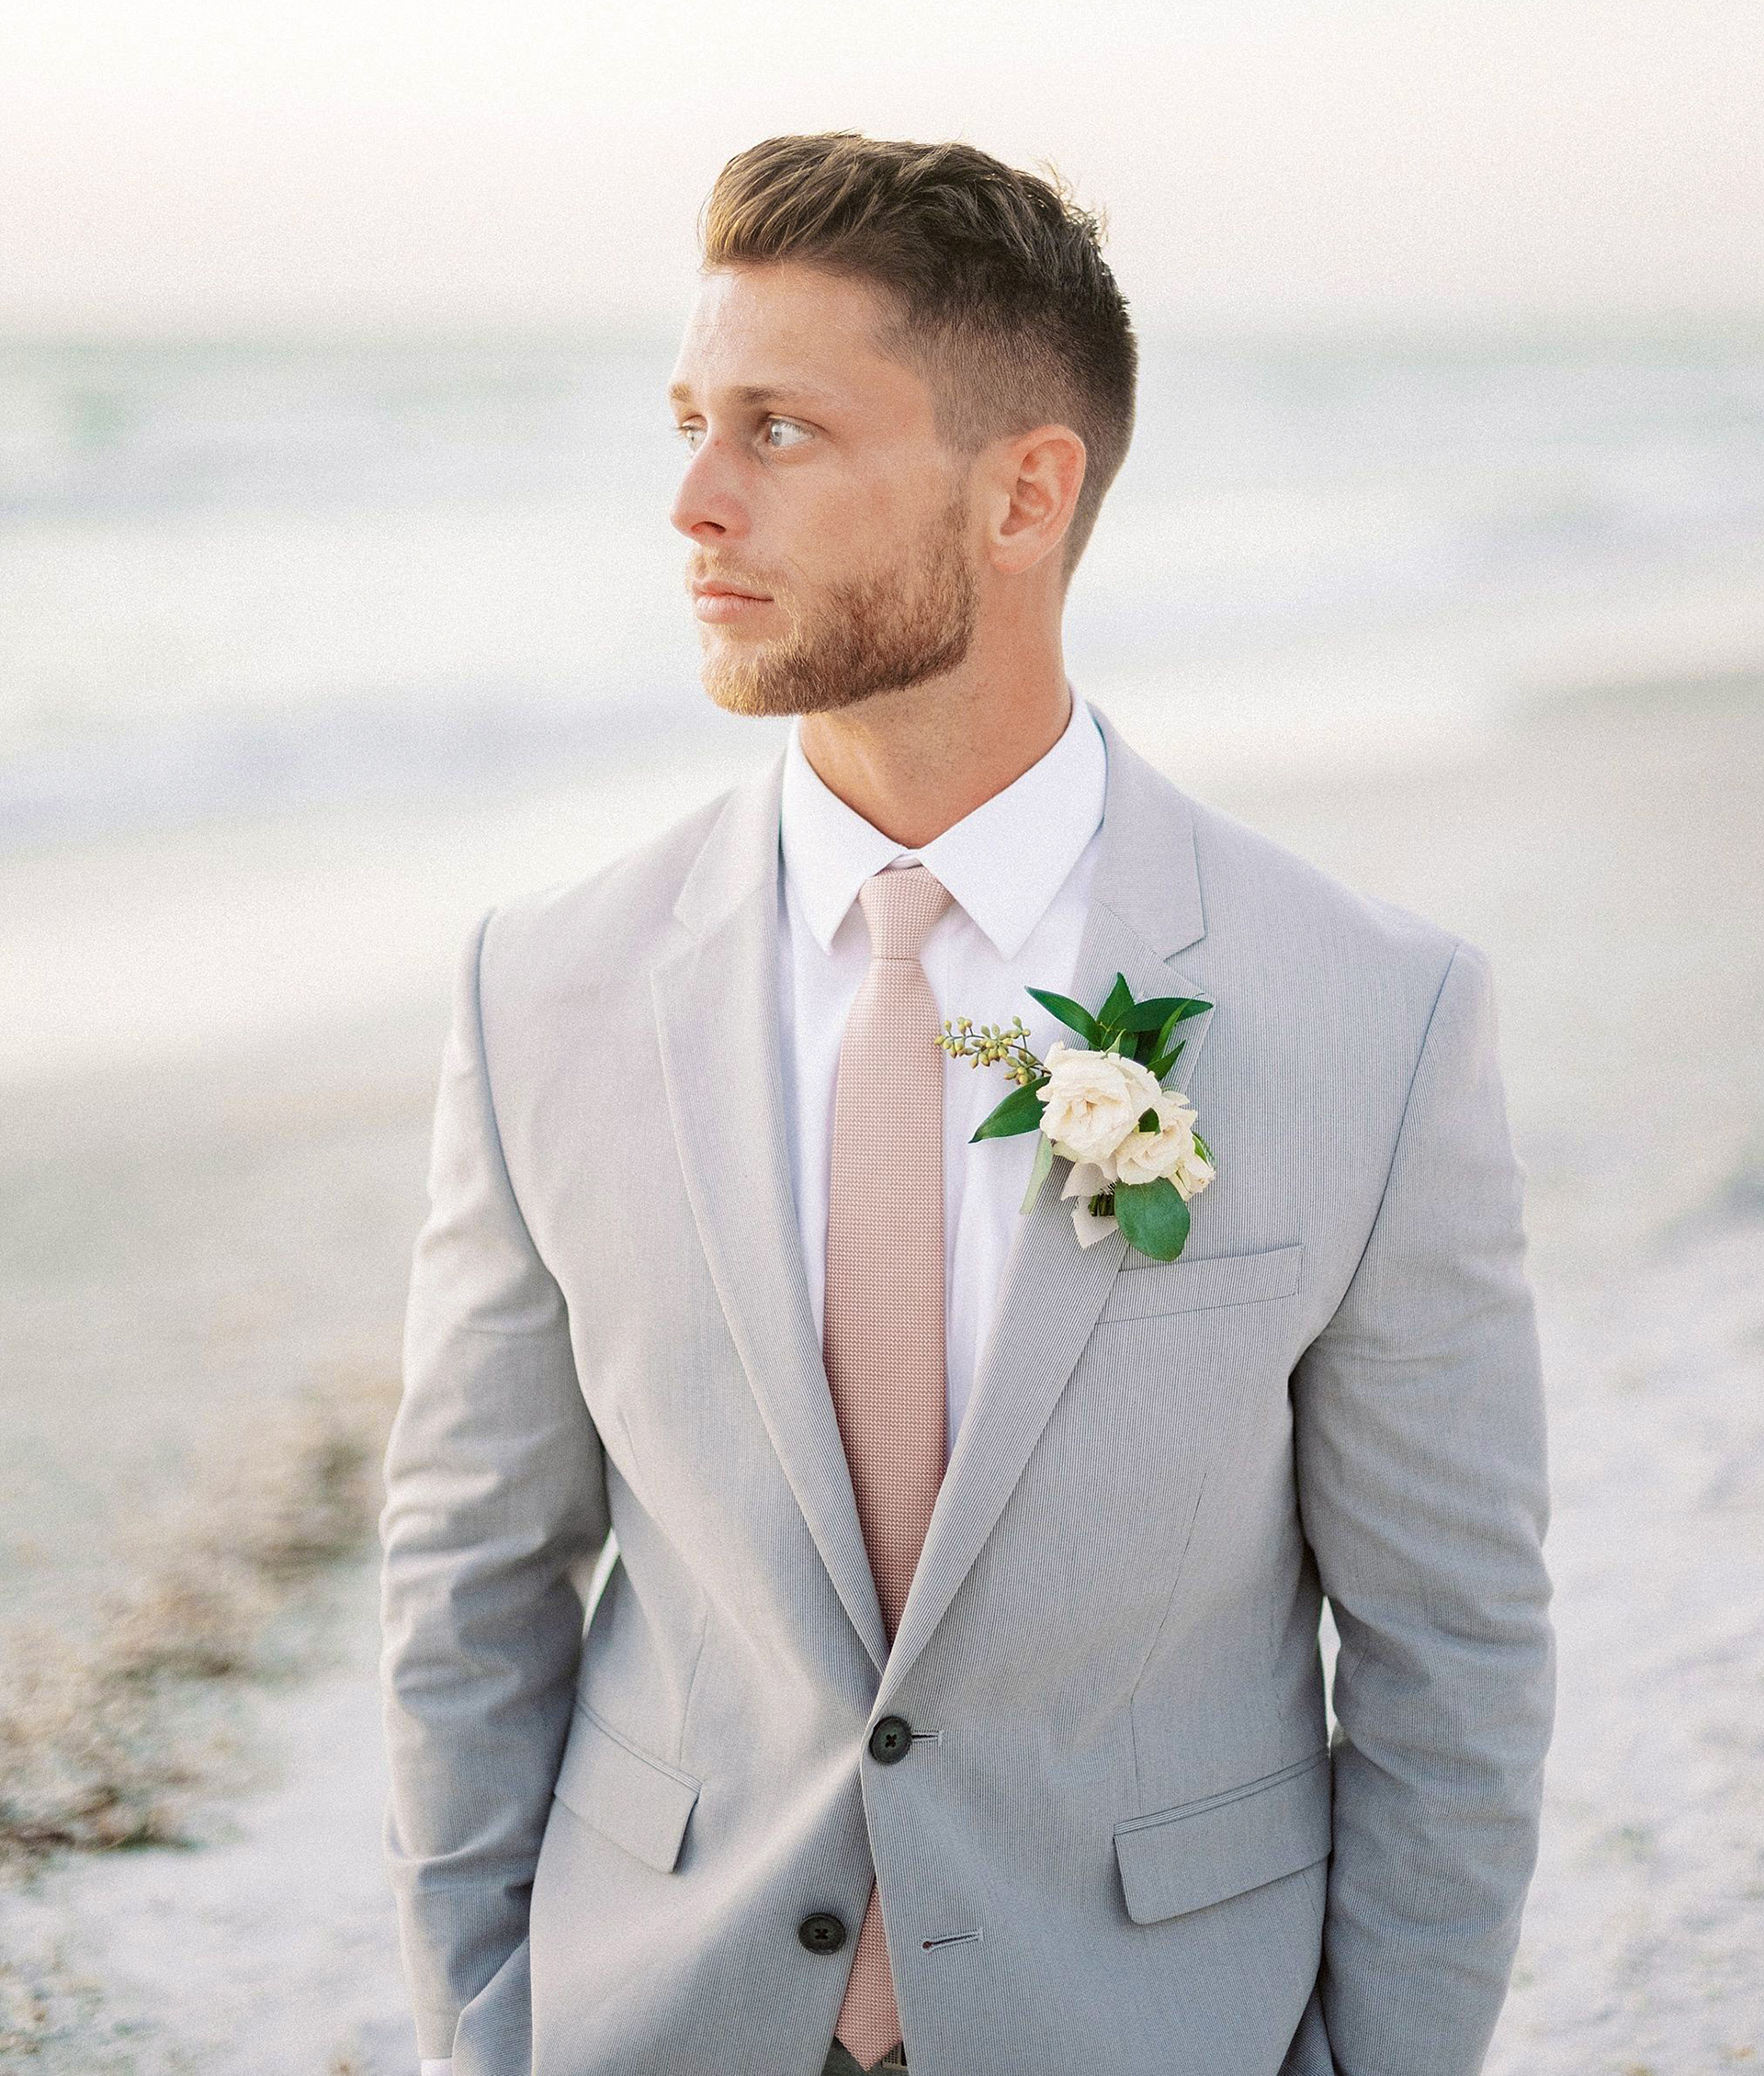 matching light grey suit with whtie shirt and light colored solid tie